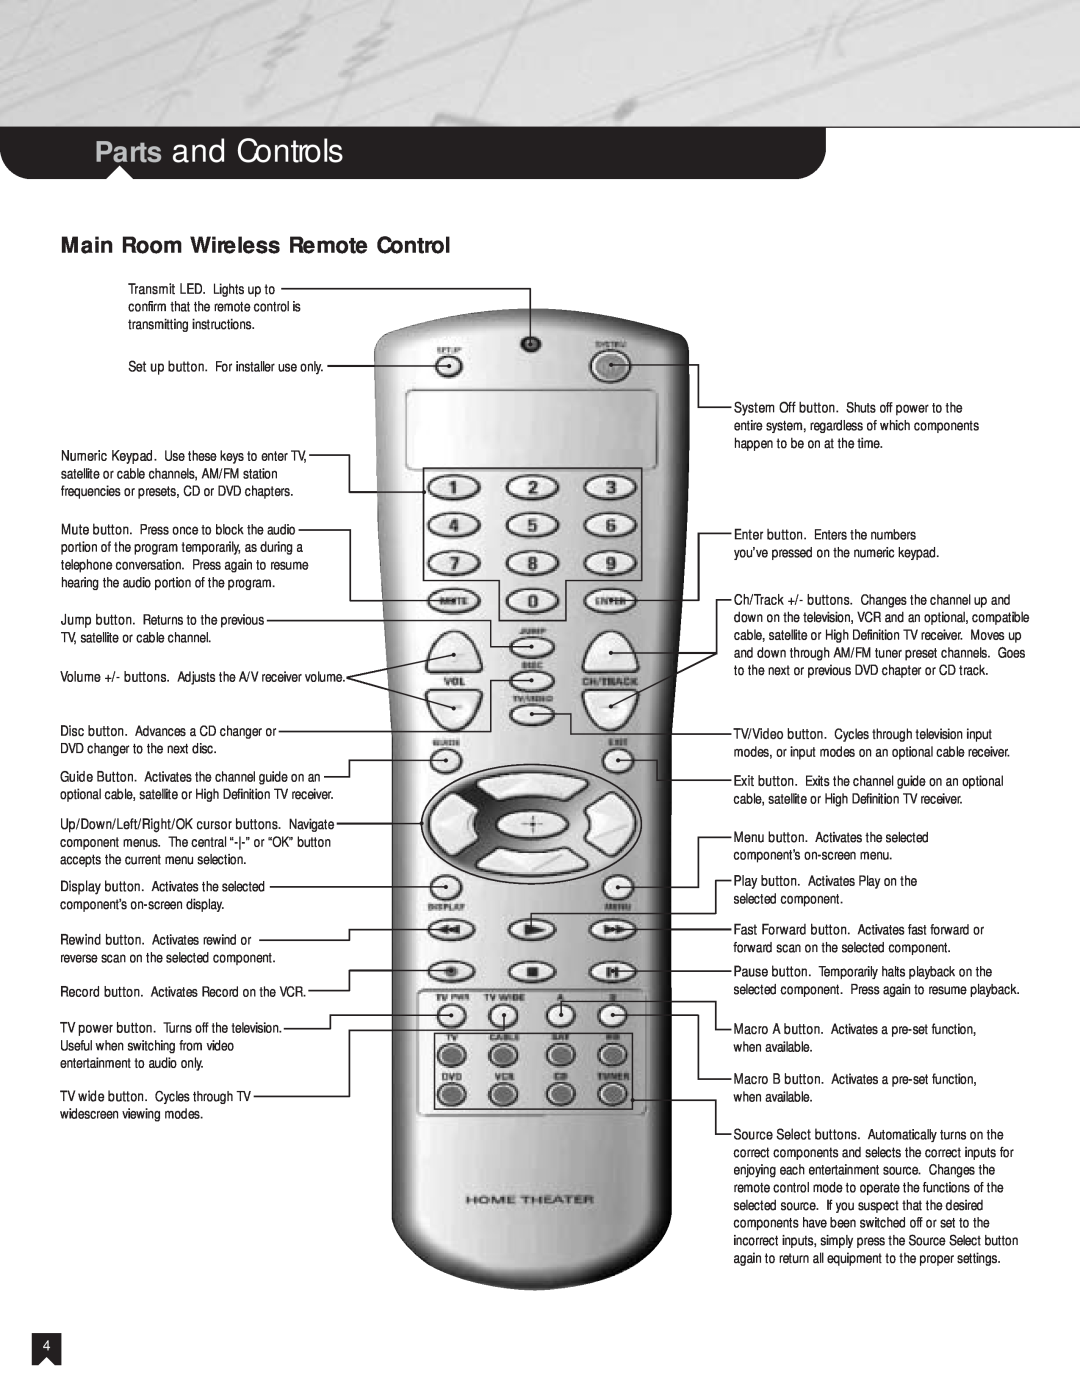 Sony NHS-301 manual Parts and Controls, Main Room Wireless Remote Control 